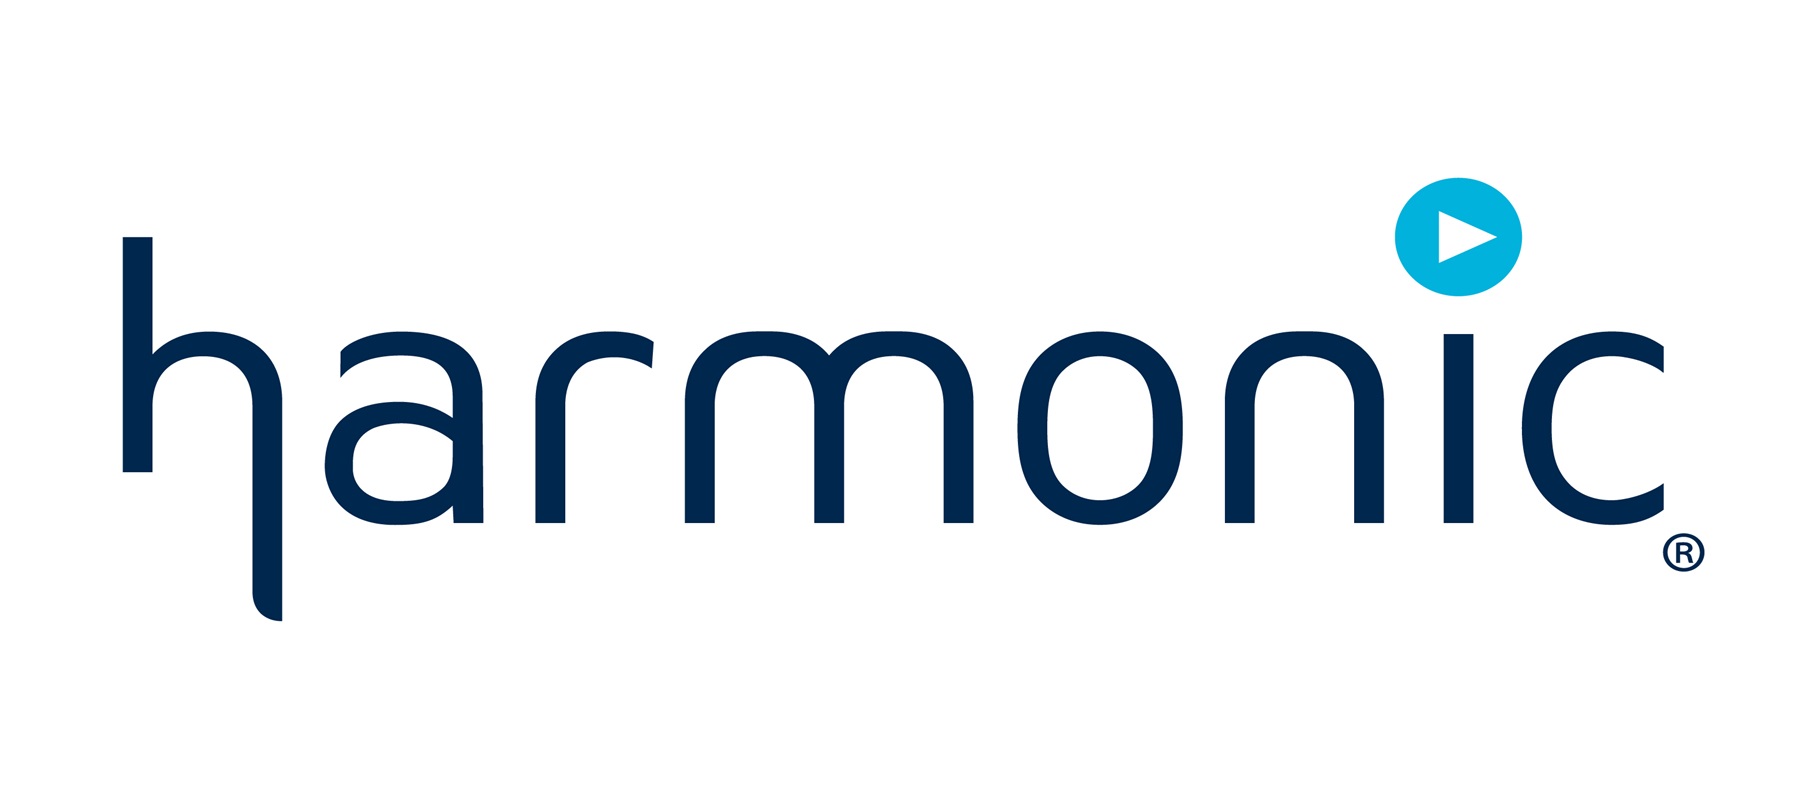 Harmonic introduces in-stream advertising for live sports streaming